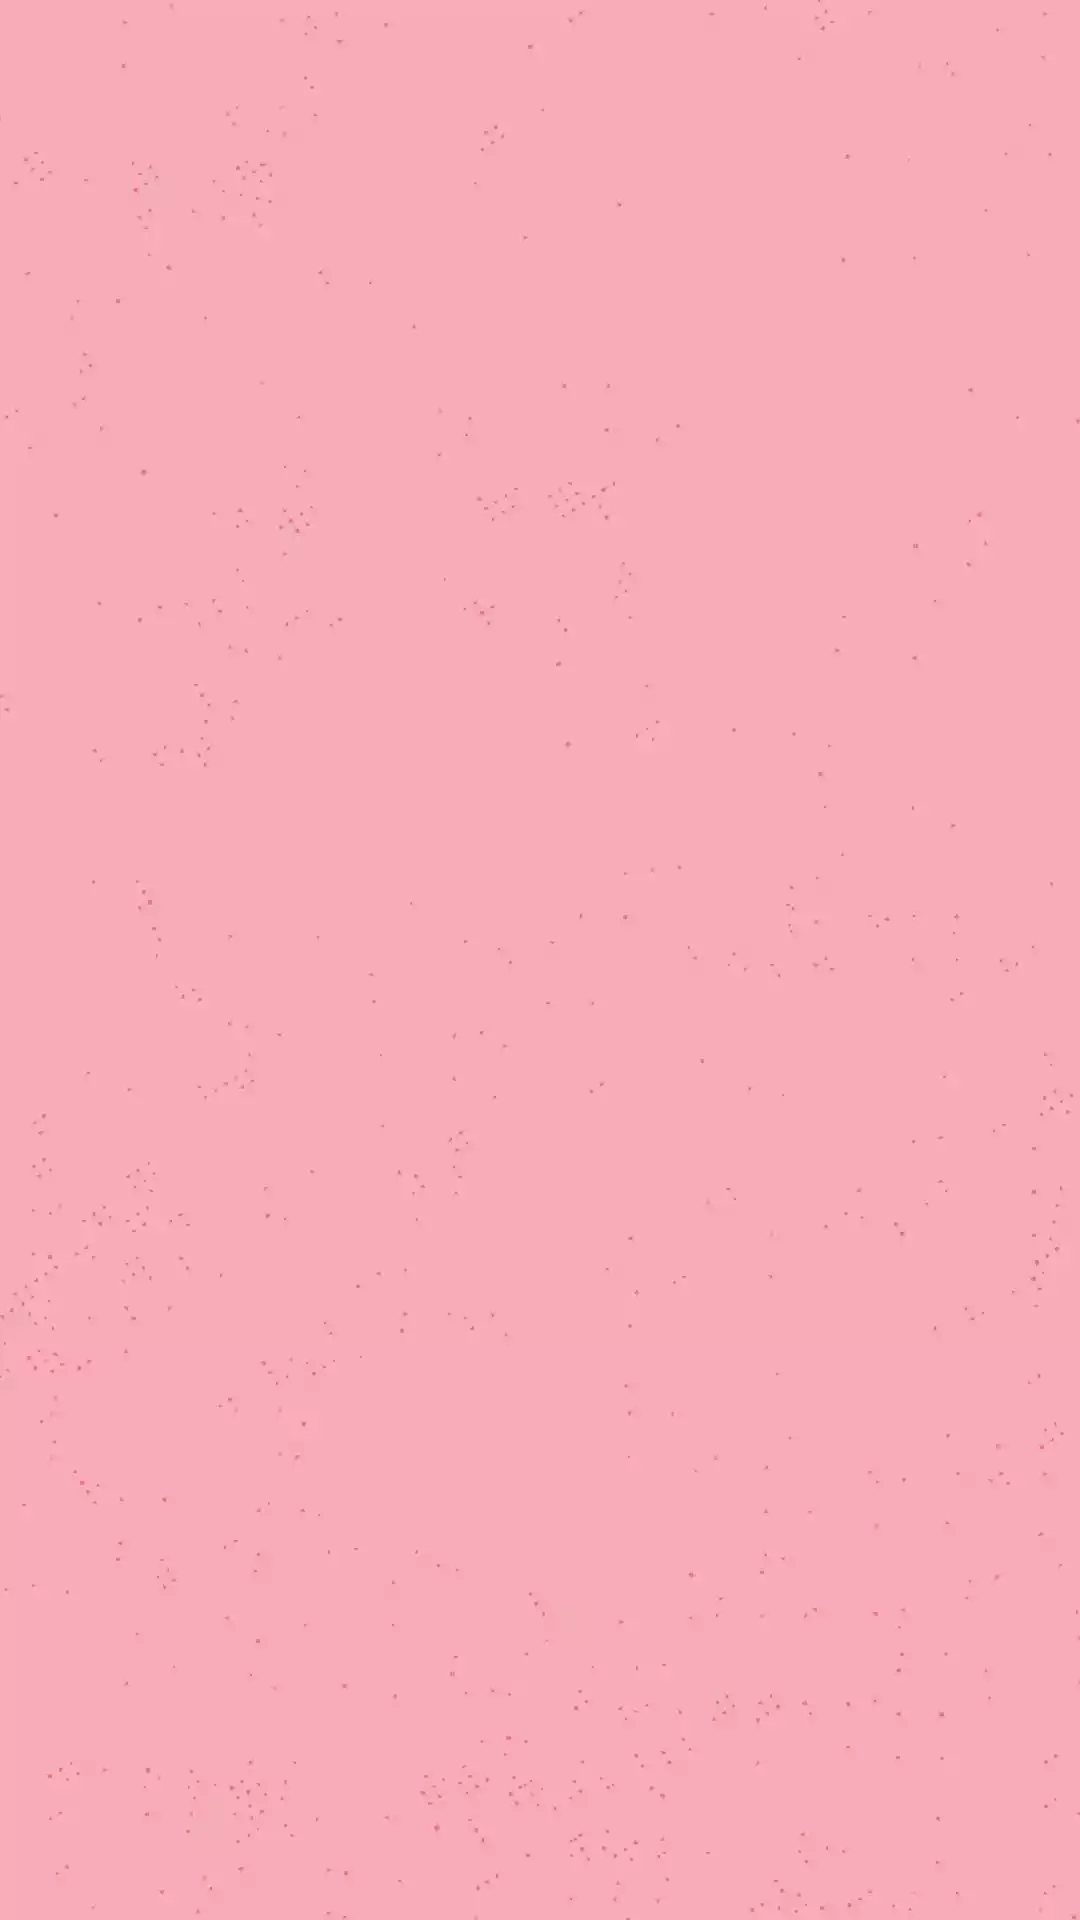 A pink image with a white dot in the bottom right corner - Light pink, soft pink